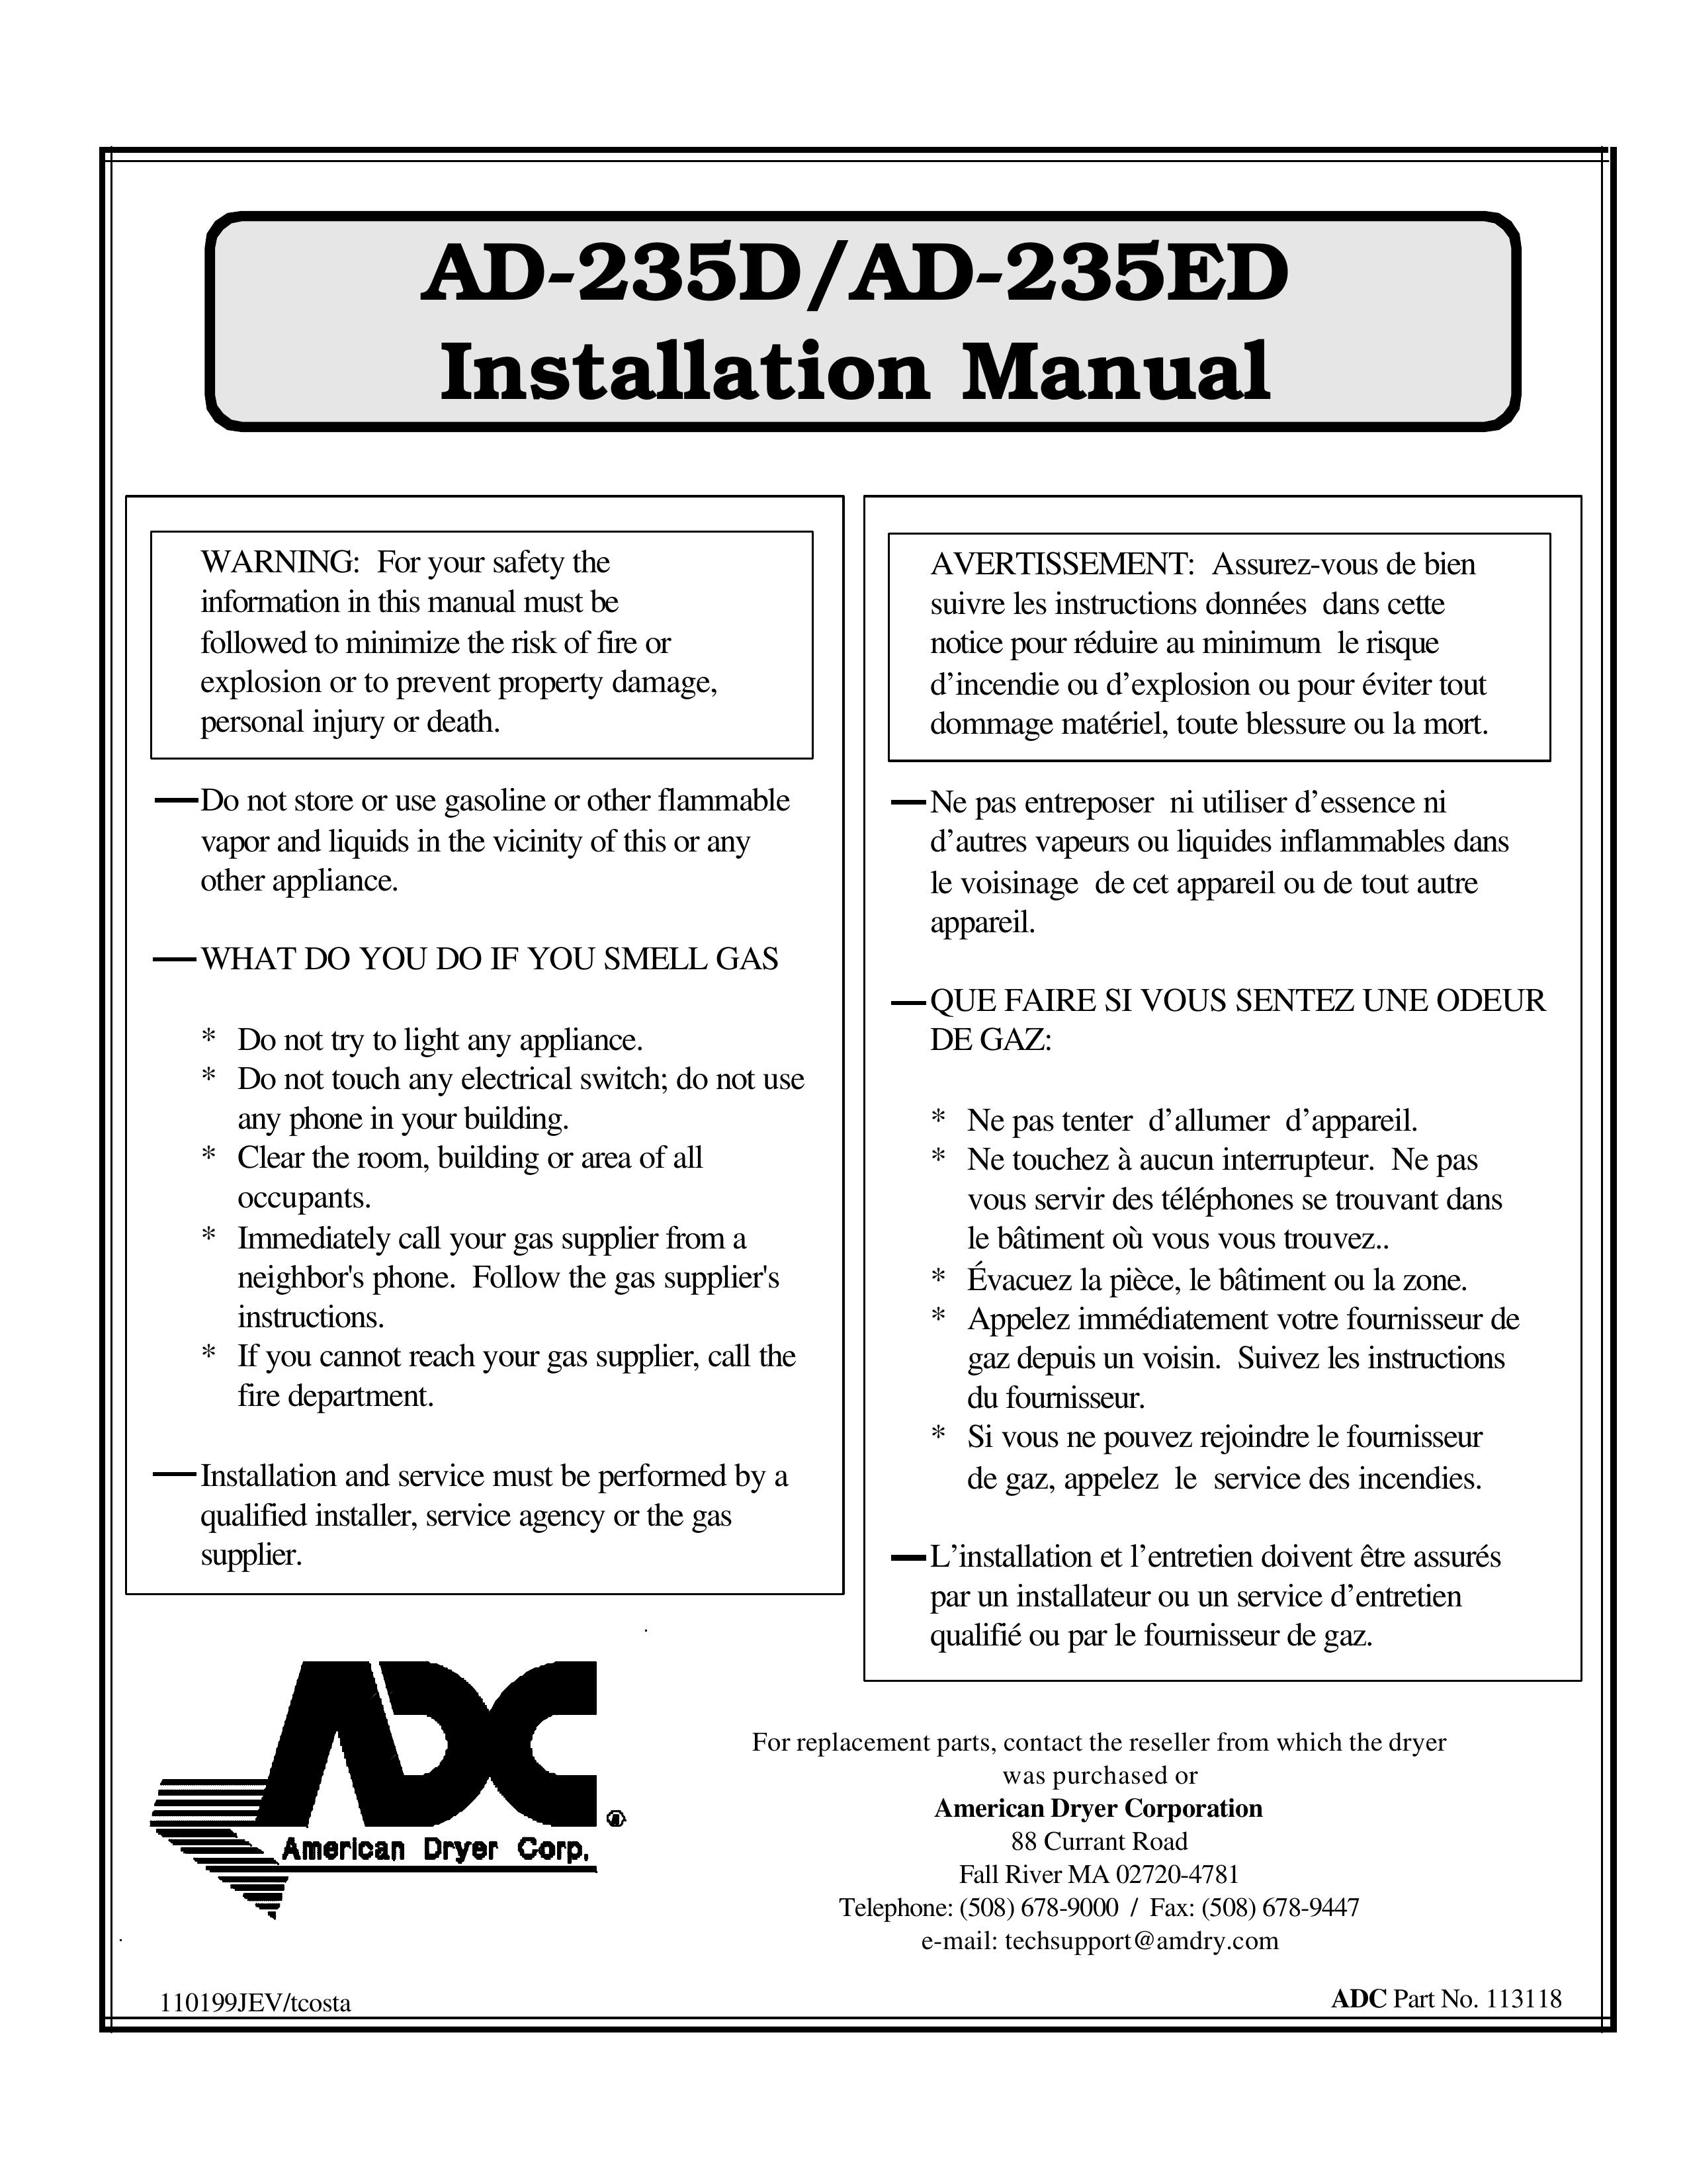 American Dryer Corp. AD-235D Clothes Dryer User Manual